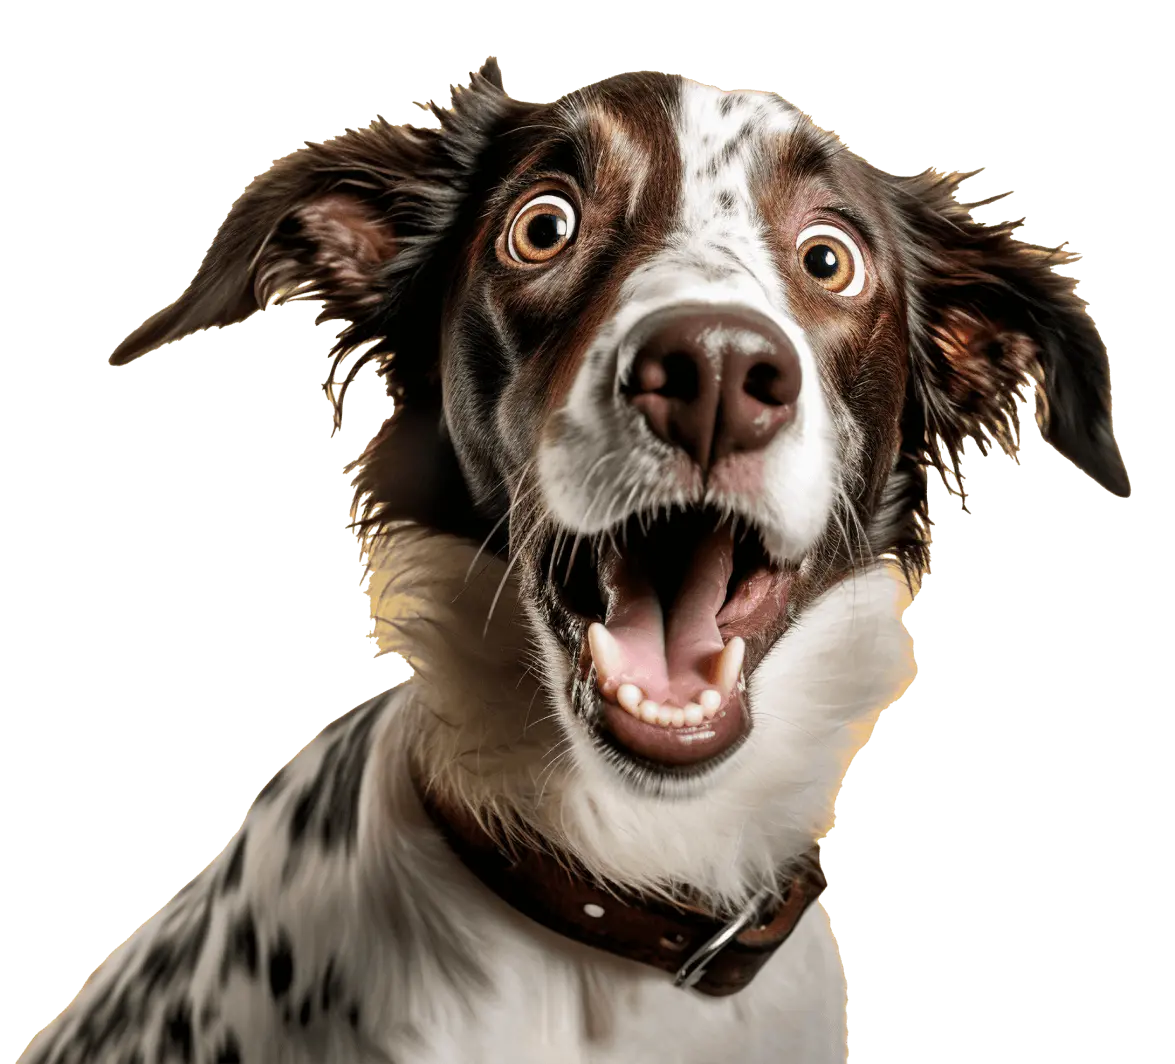 A Collie Dog with his eyes and mouth open - Pet Websites from Visualsoft to Shopify